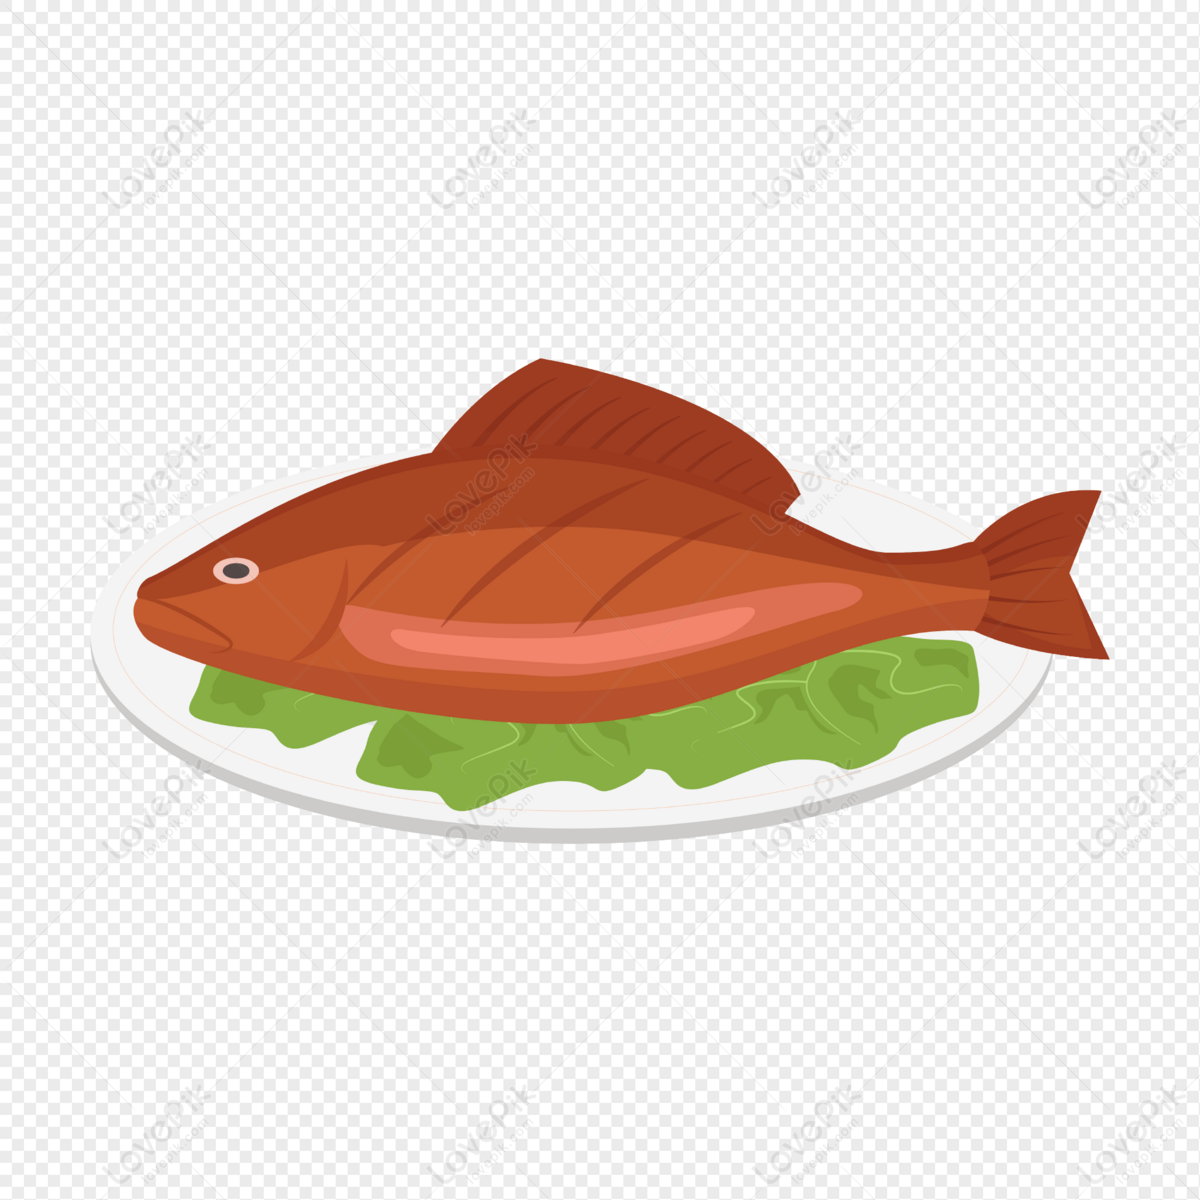 Grilled Fish, Fish, Fish Smell, Grilled Fish PNG Transparent Image And  Clipart Image For Free Download - Lovepik